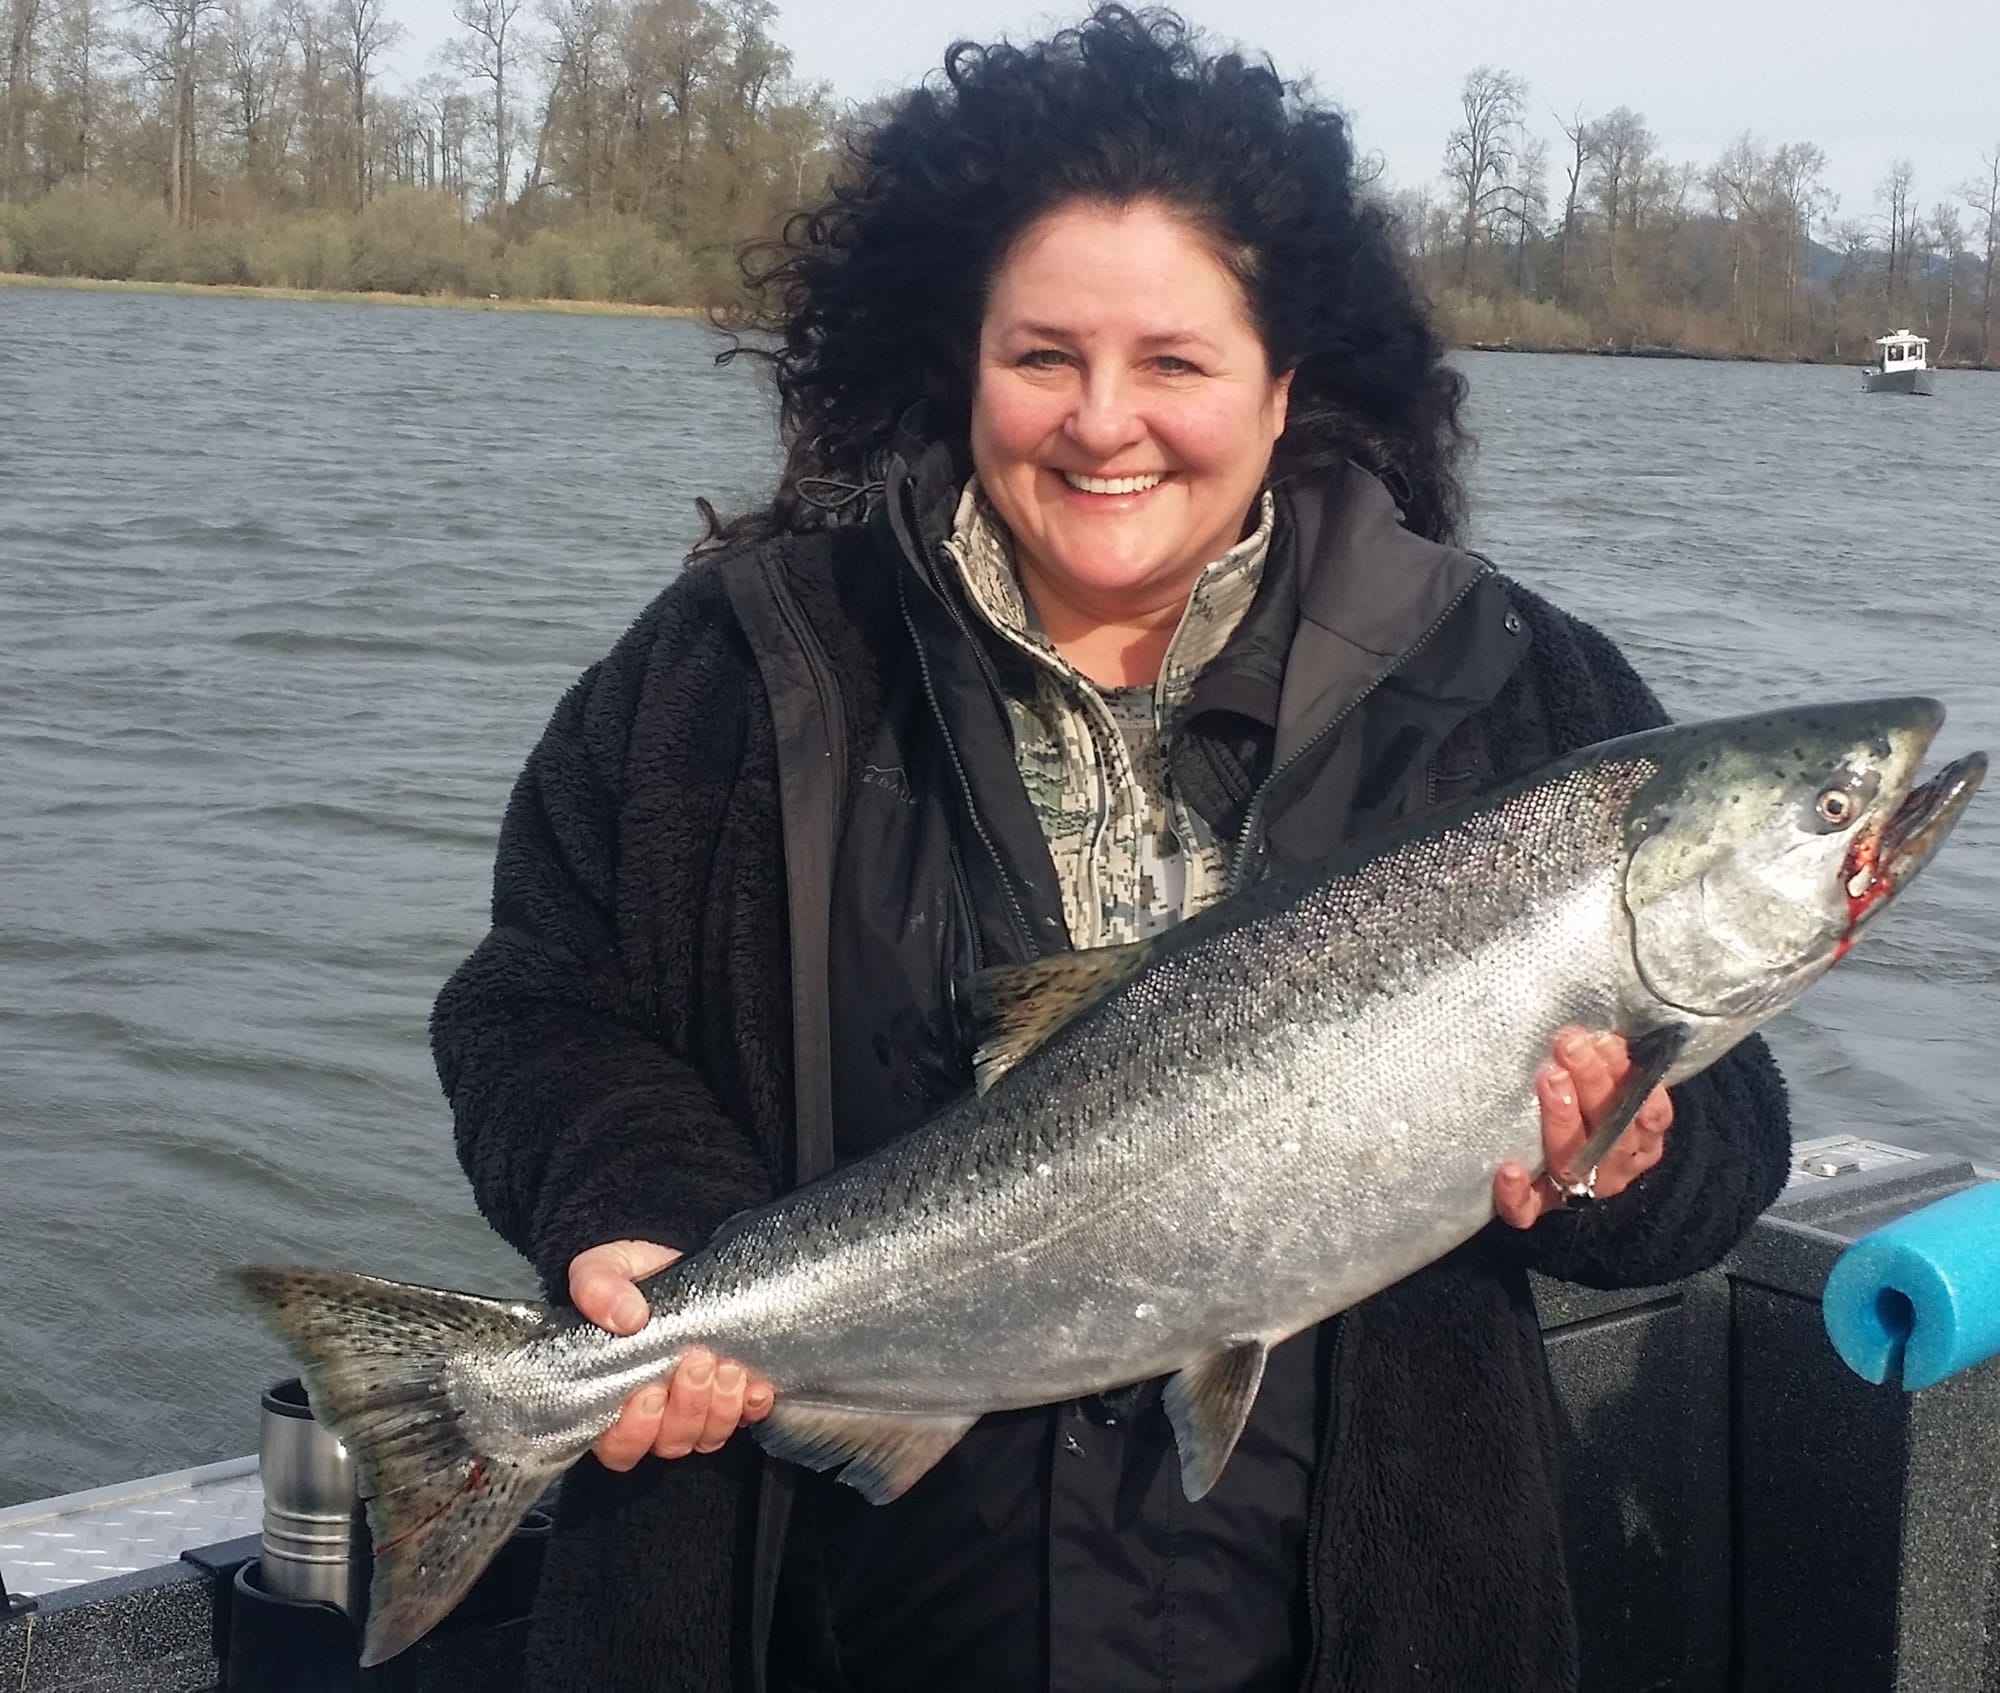 Baabs Teed of Vancouver holds a spring chinook she caught while anchor fishing in the lower Columbia River.